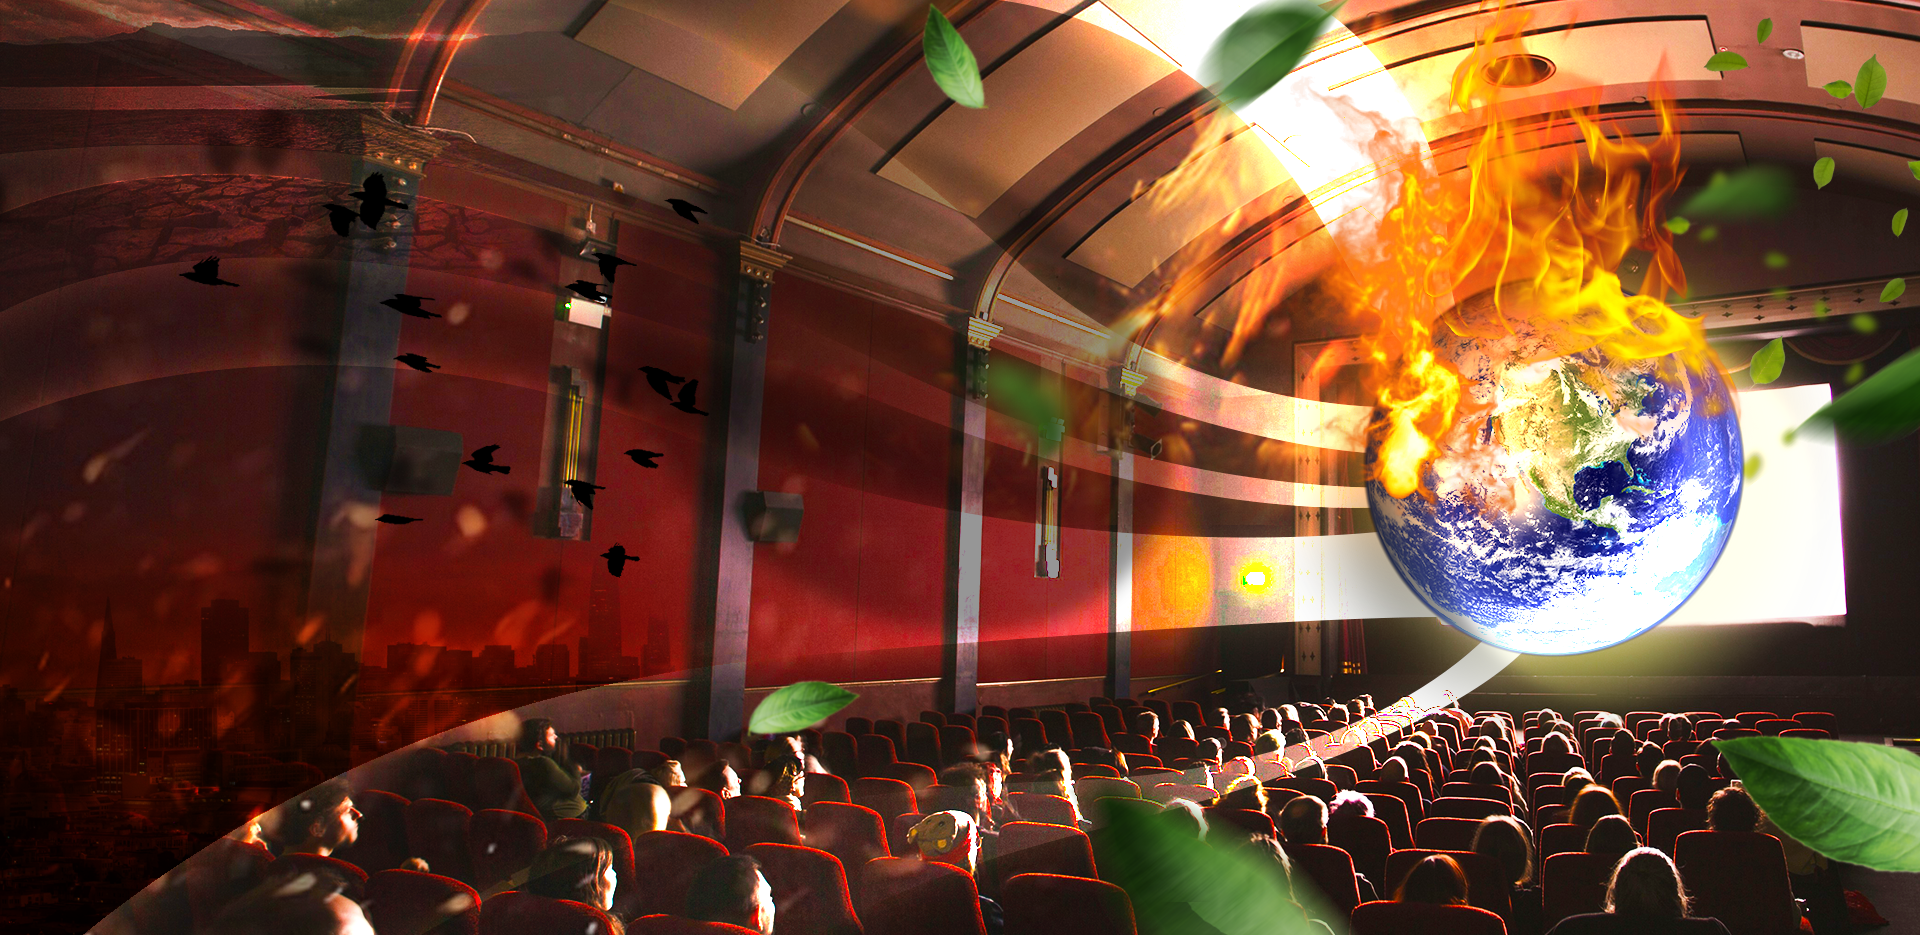 Cinema with Earth on fire